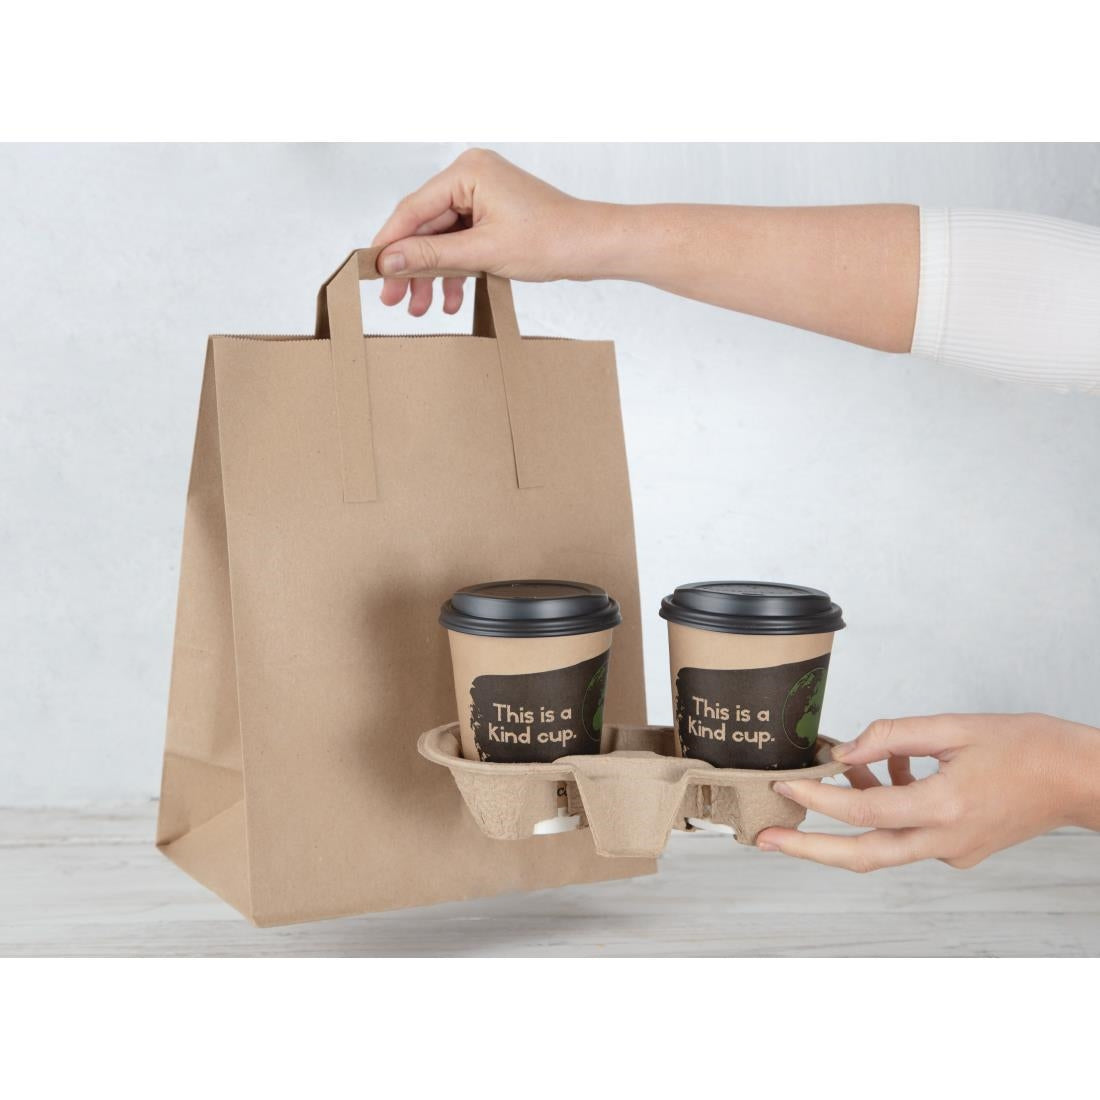 Fiesta Green Recycled Brown Paper Carrier Bags (Pack of 250) JD Catering Equipment Solutions Ltd